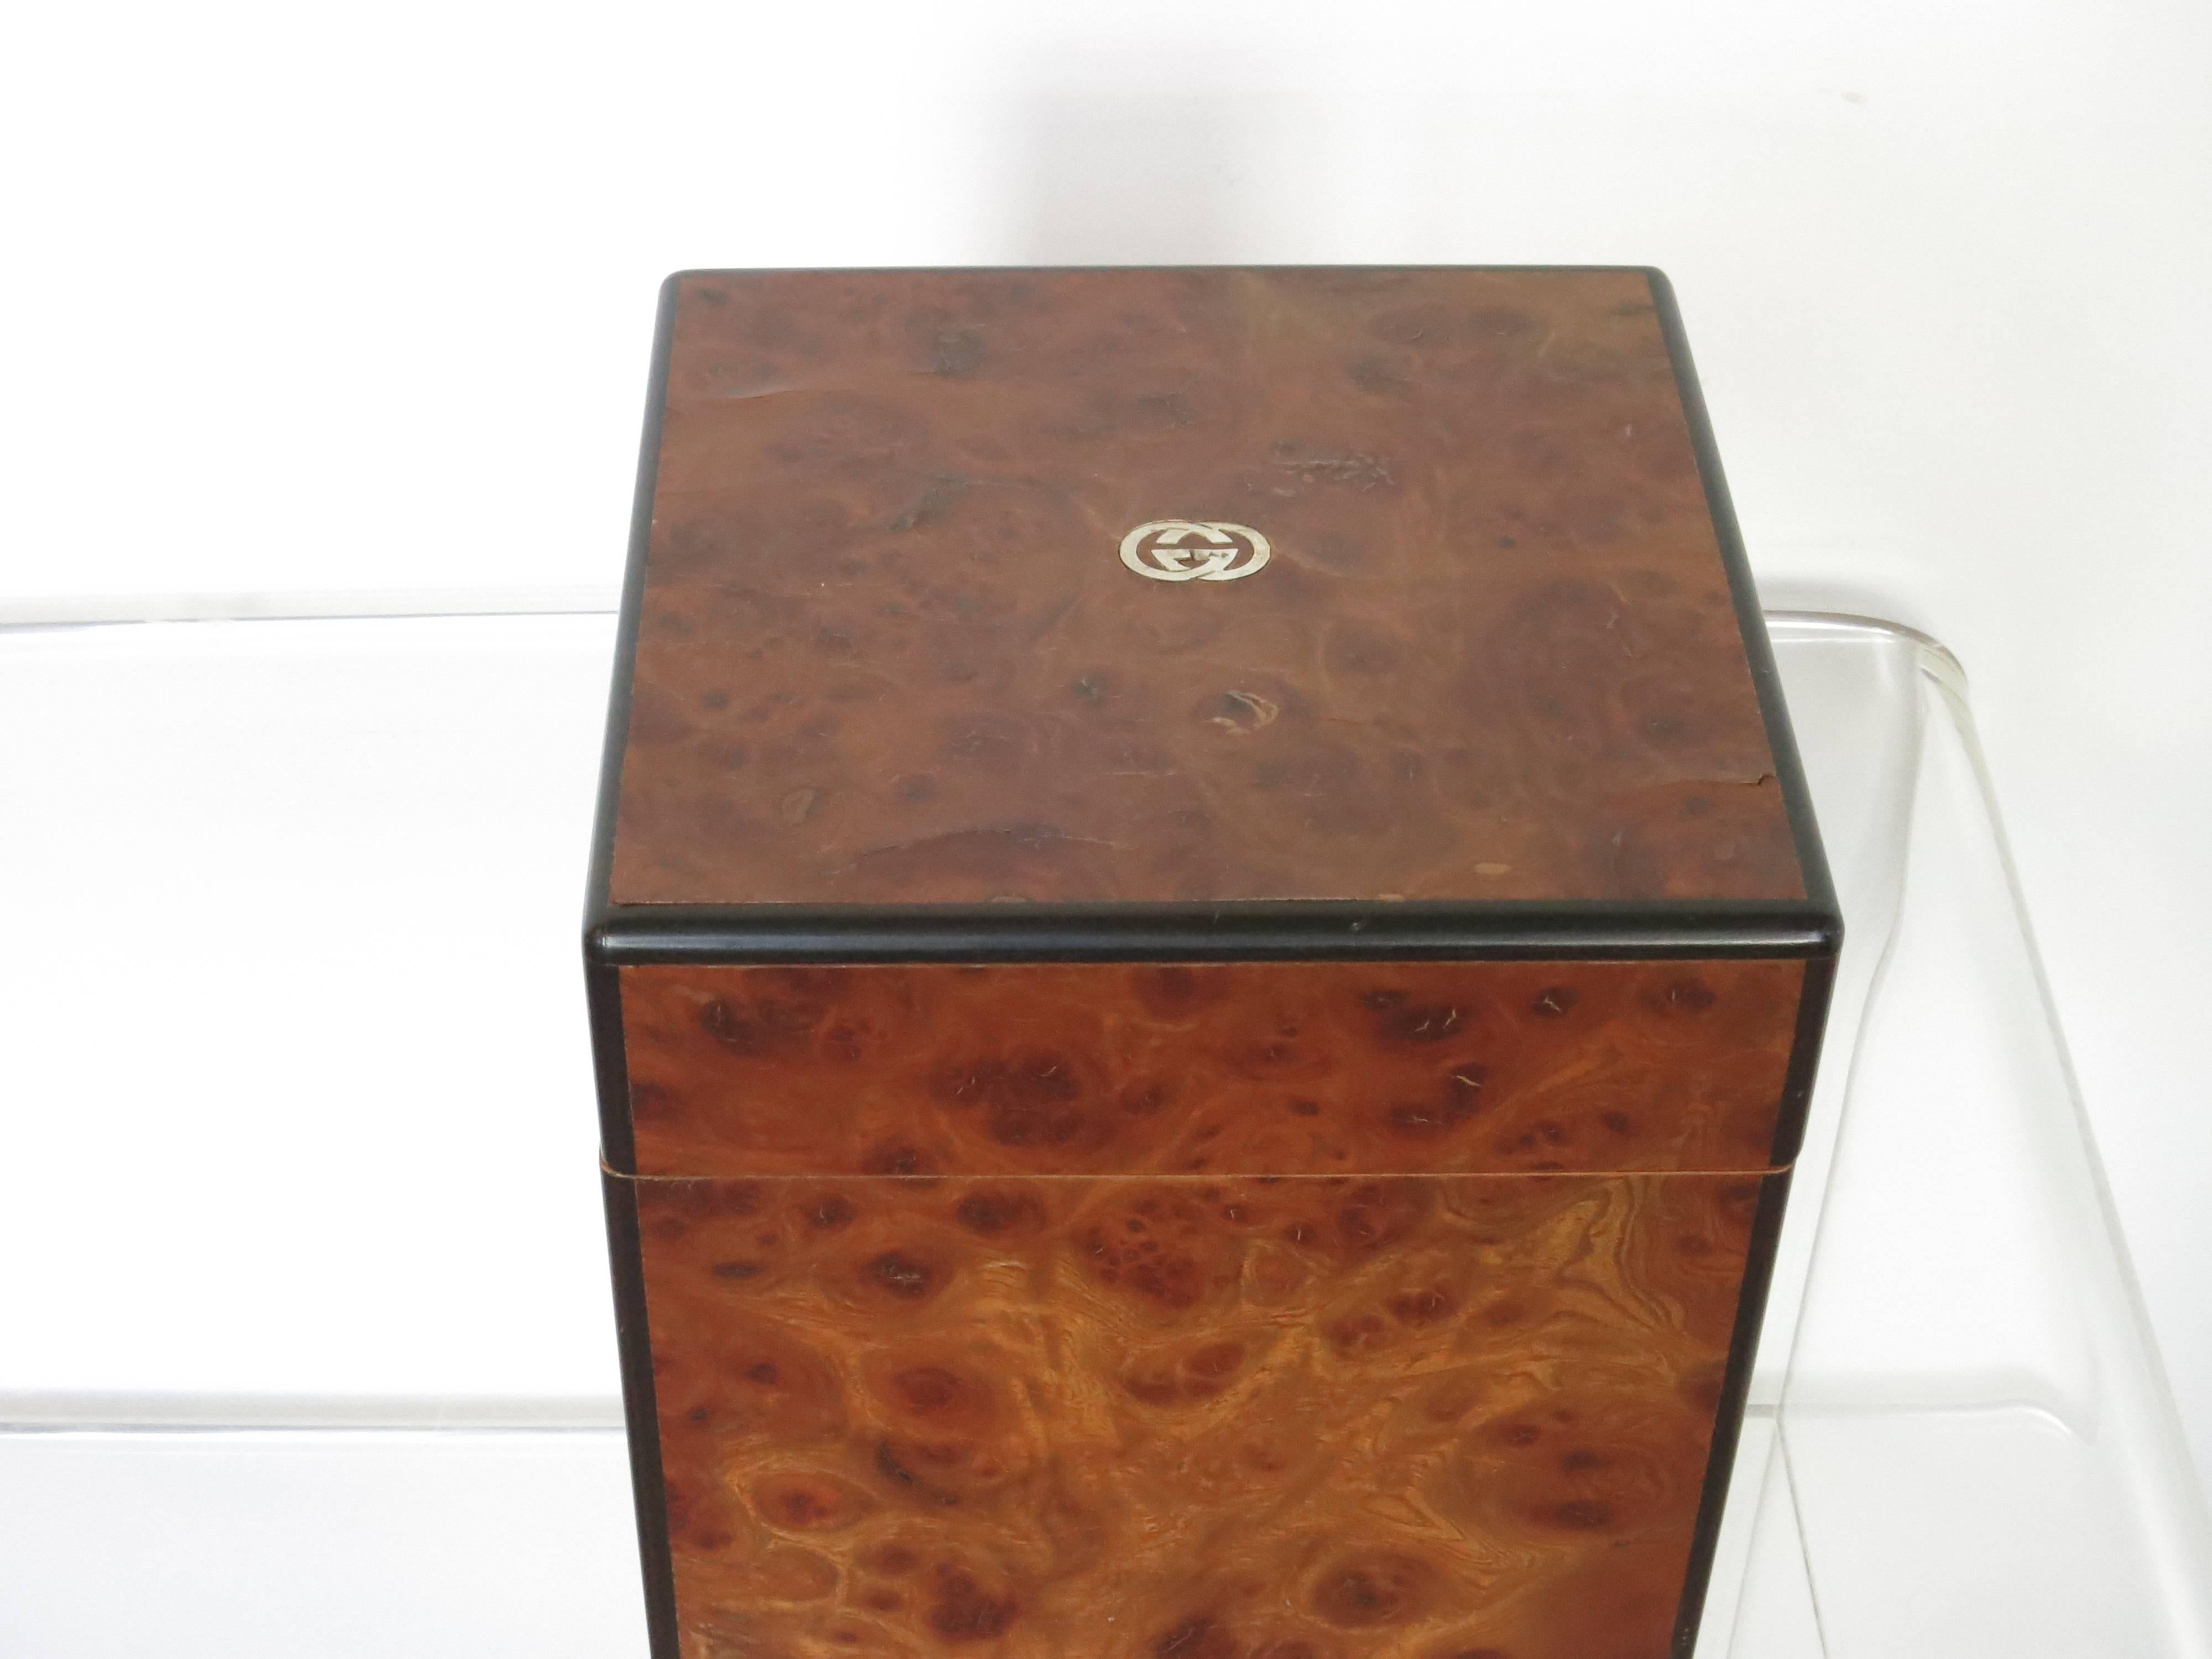 Vintage 1980s Gucci burl wood ice bucket. Very clean with some lifting to the burl veneer on the top. It is 7.5